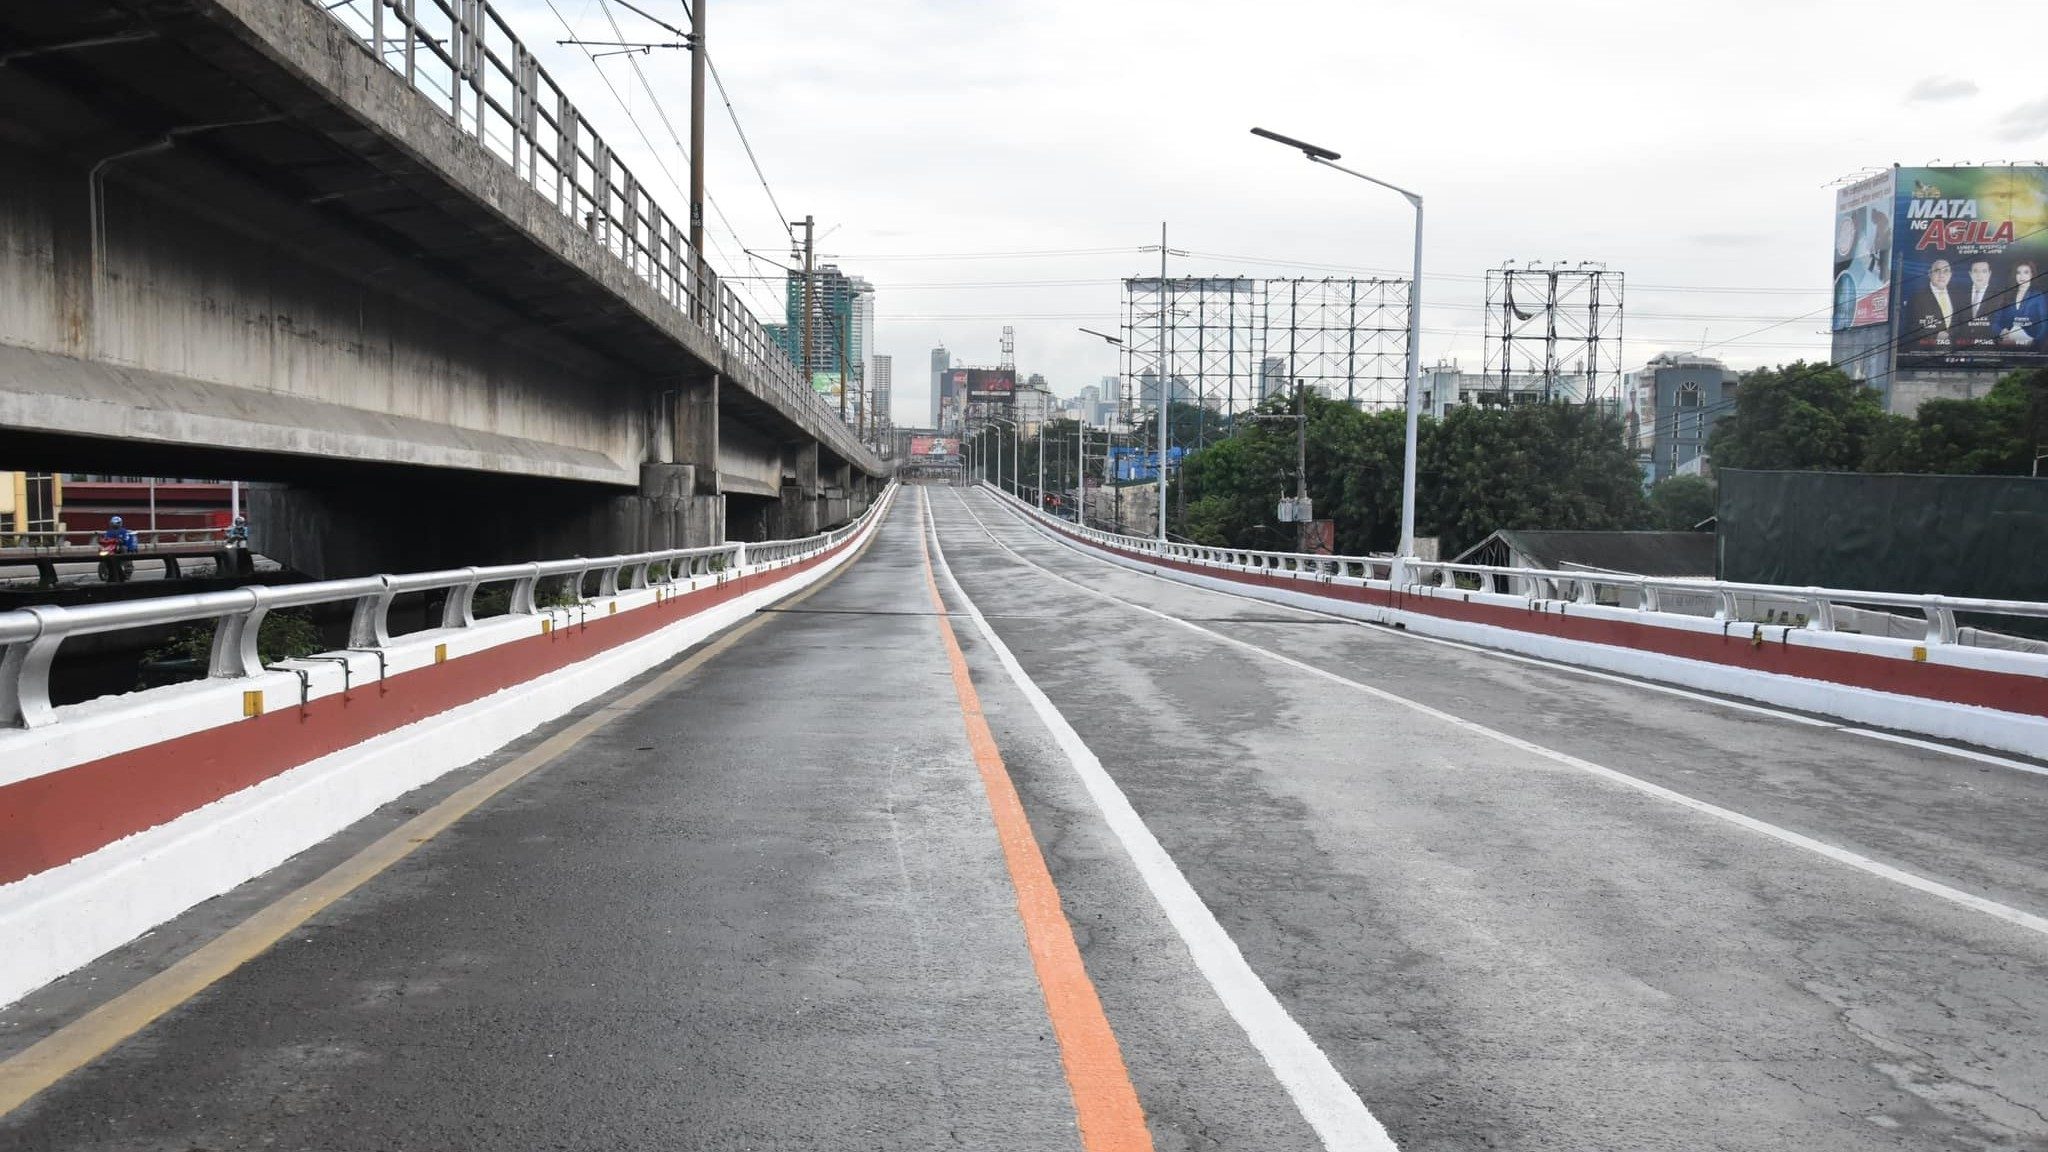 LIST: Alternative routes due to EDSA-Kamuning flyover closure starting May 1